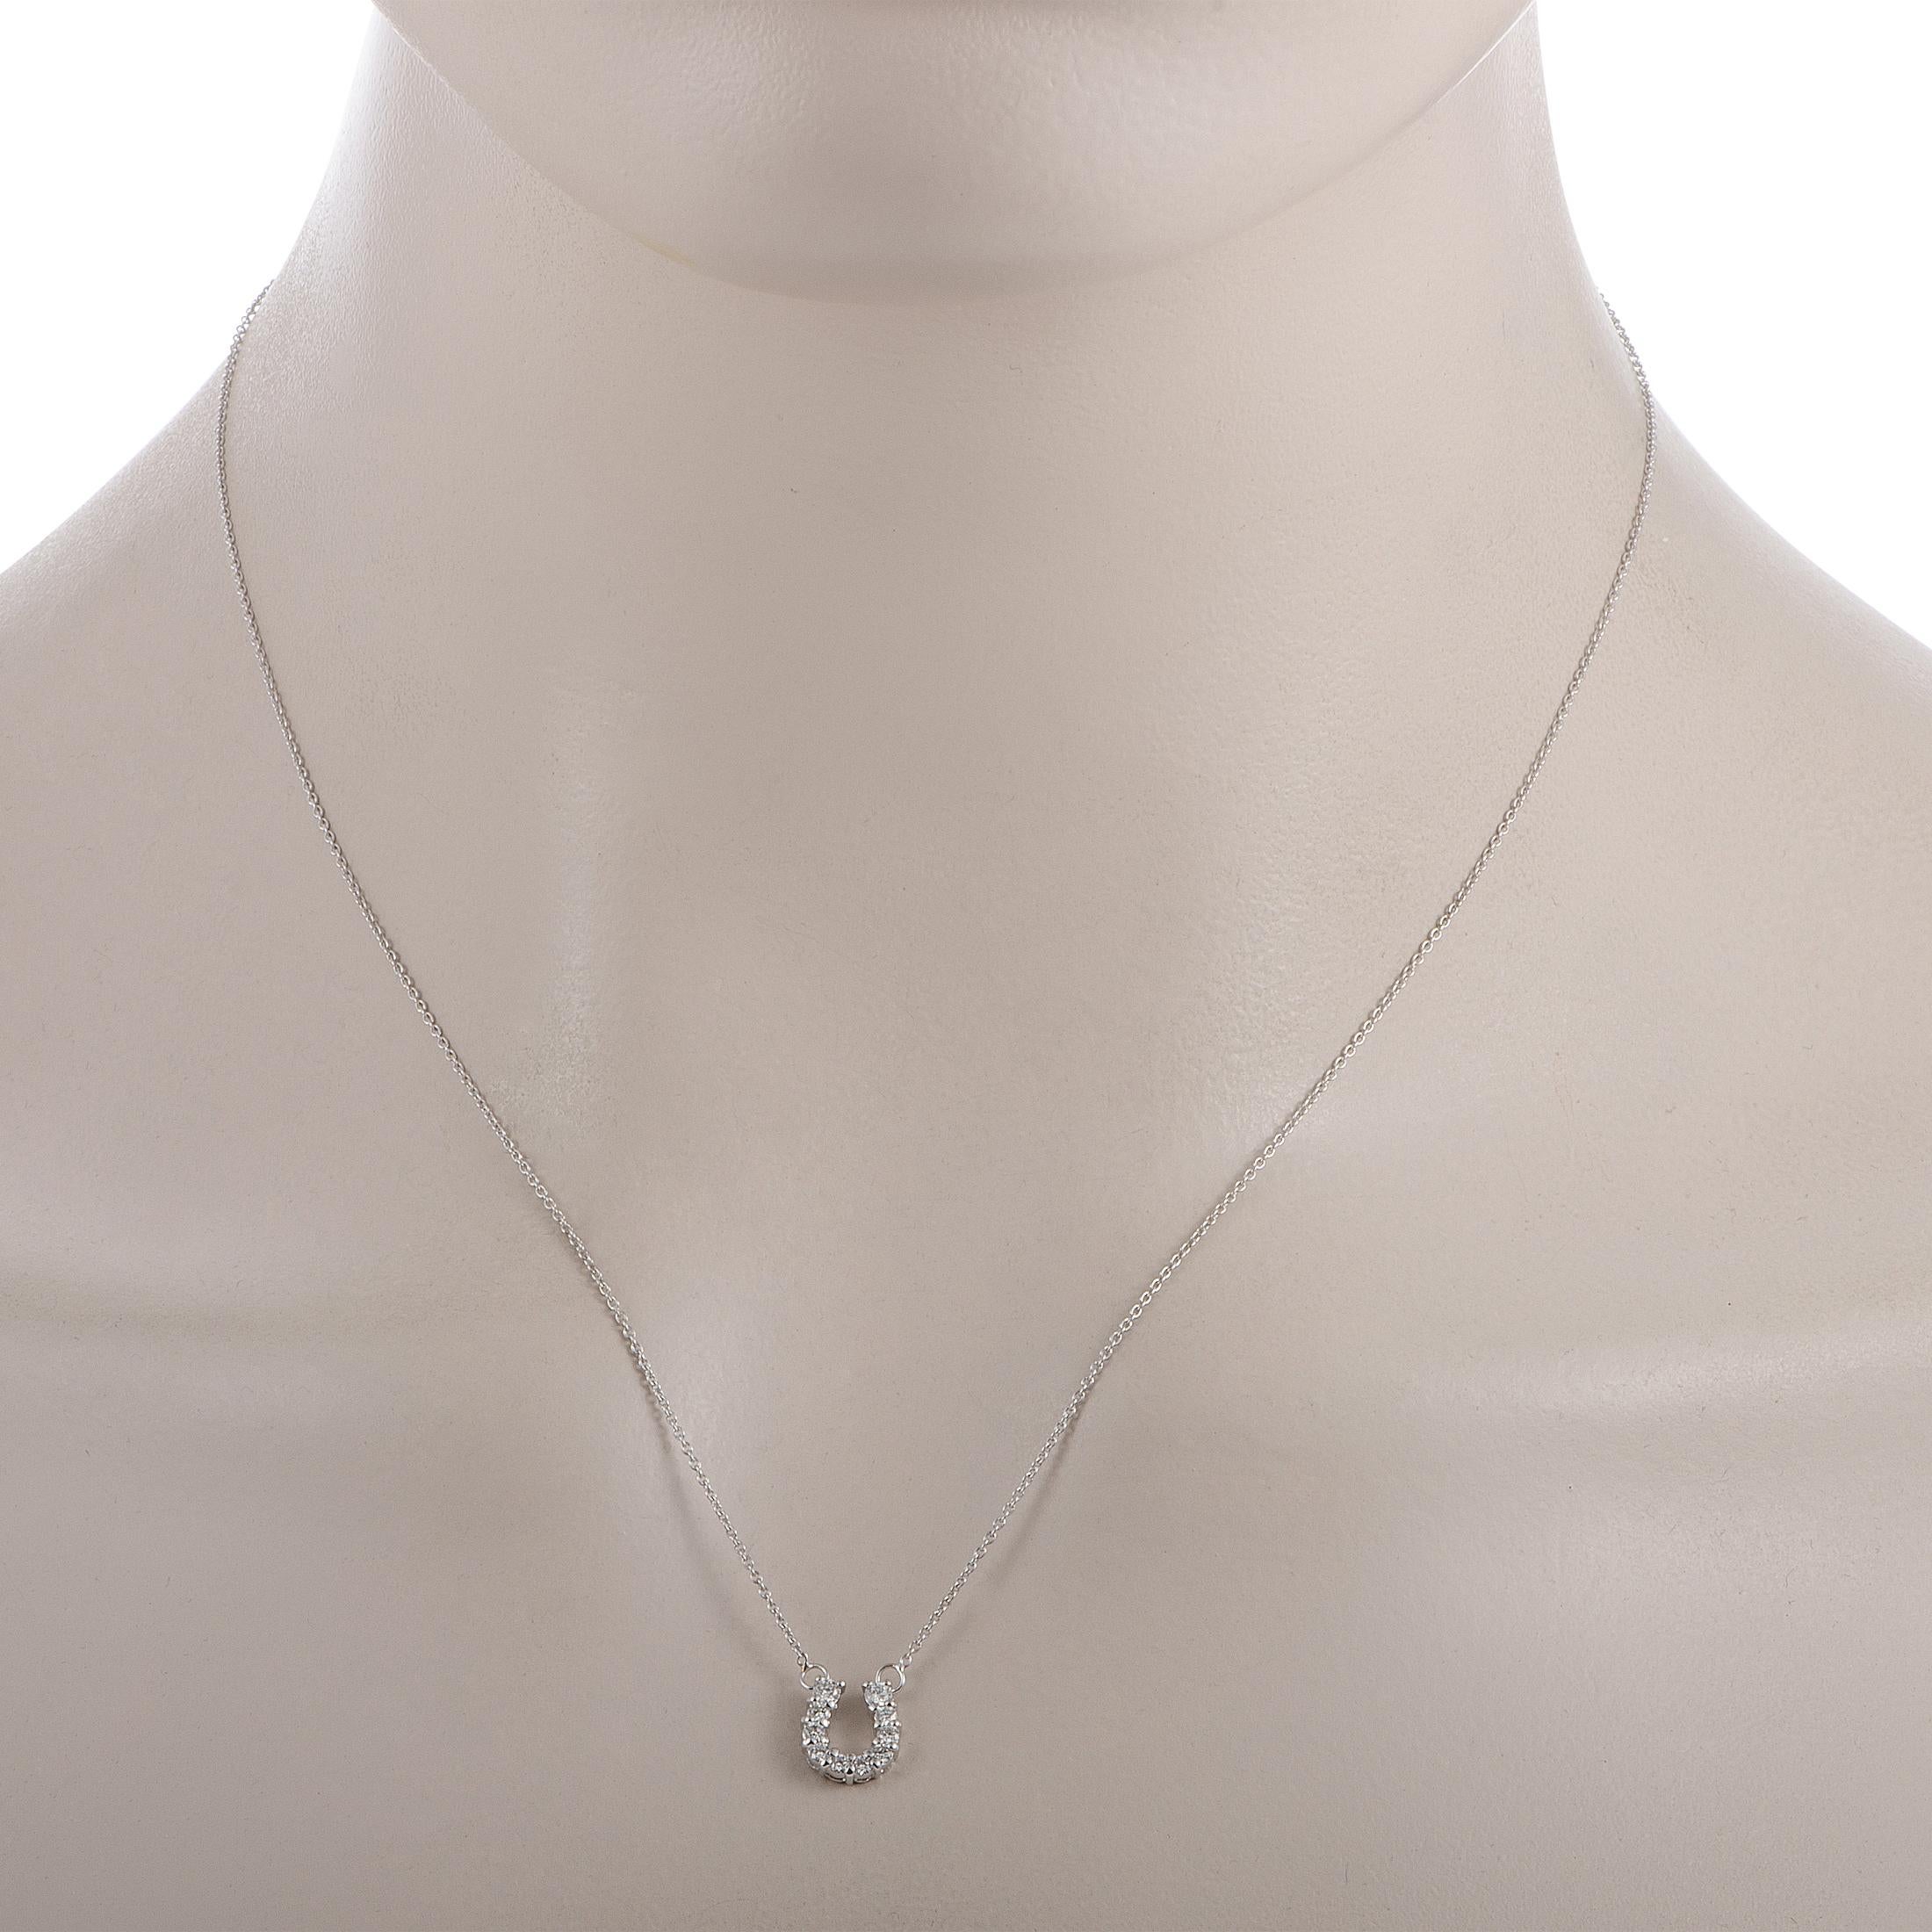 The “Tiny Treasures Horseshoe” necklace by Roberto Coin is crafted from 18K white gold and set with a total of 0.25 carats of diamonds. The necklace weighs 2.6 grams, boasting an 18” chain onto which a 0.37” by 0.25” pendant is attached.
 
